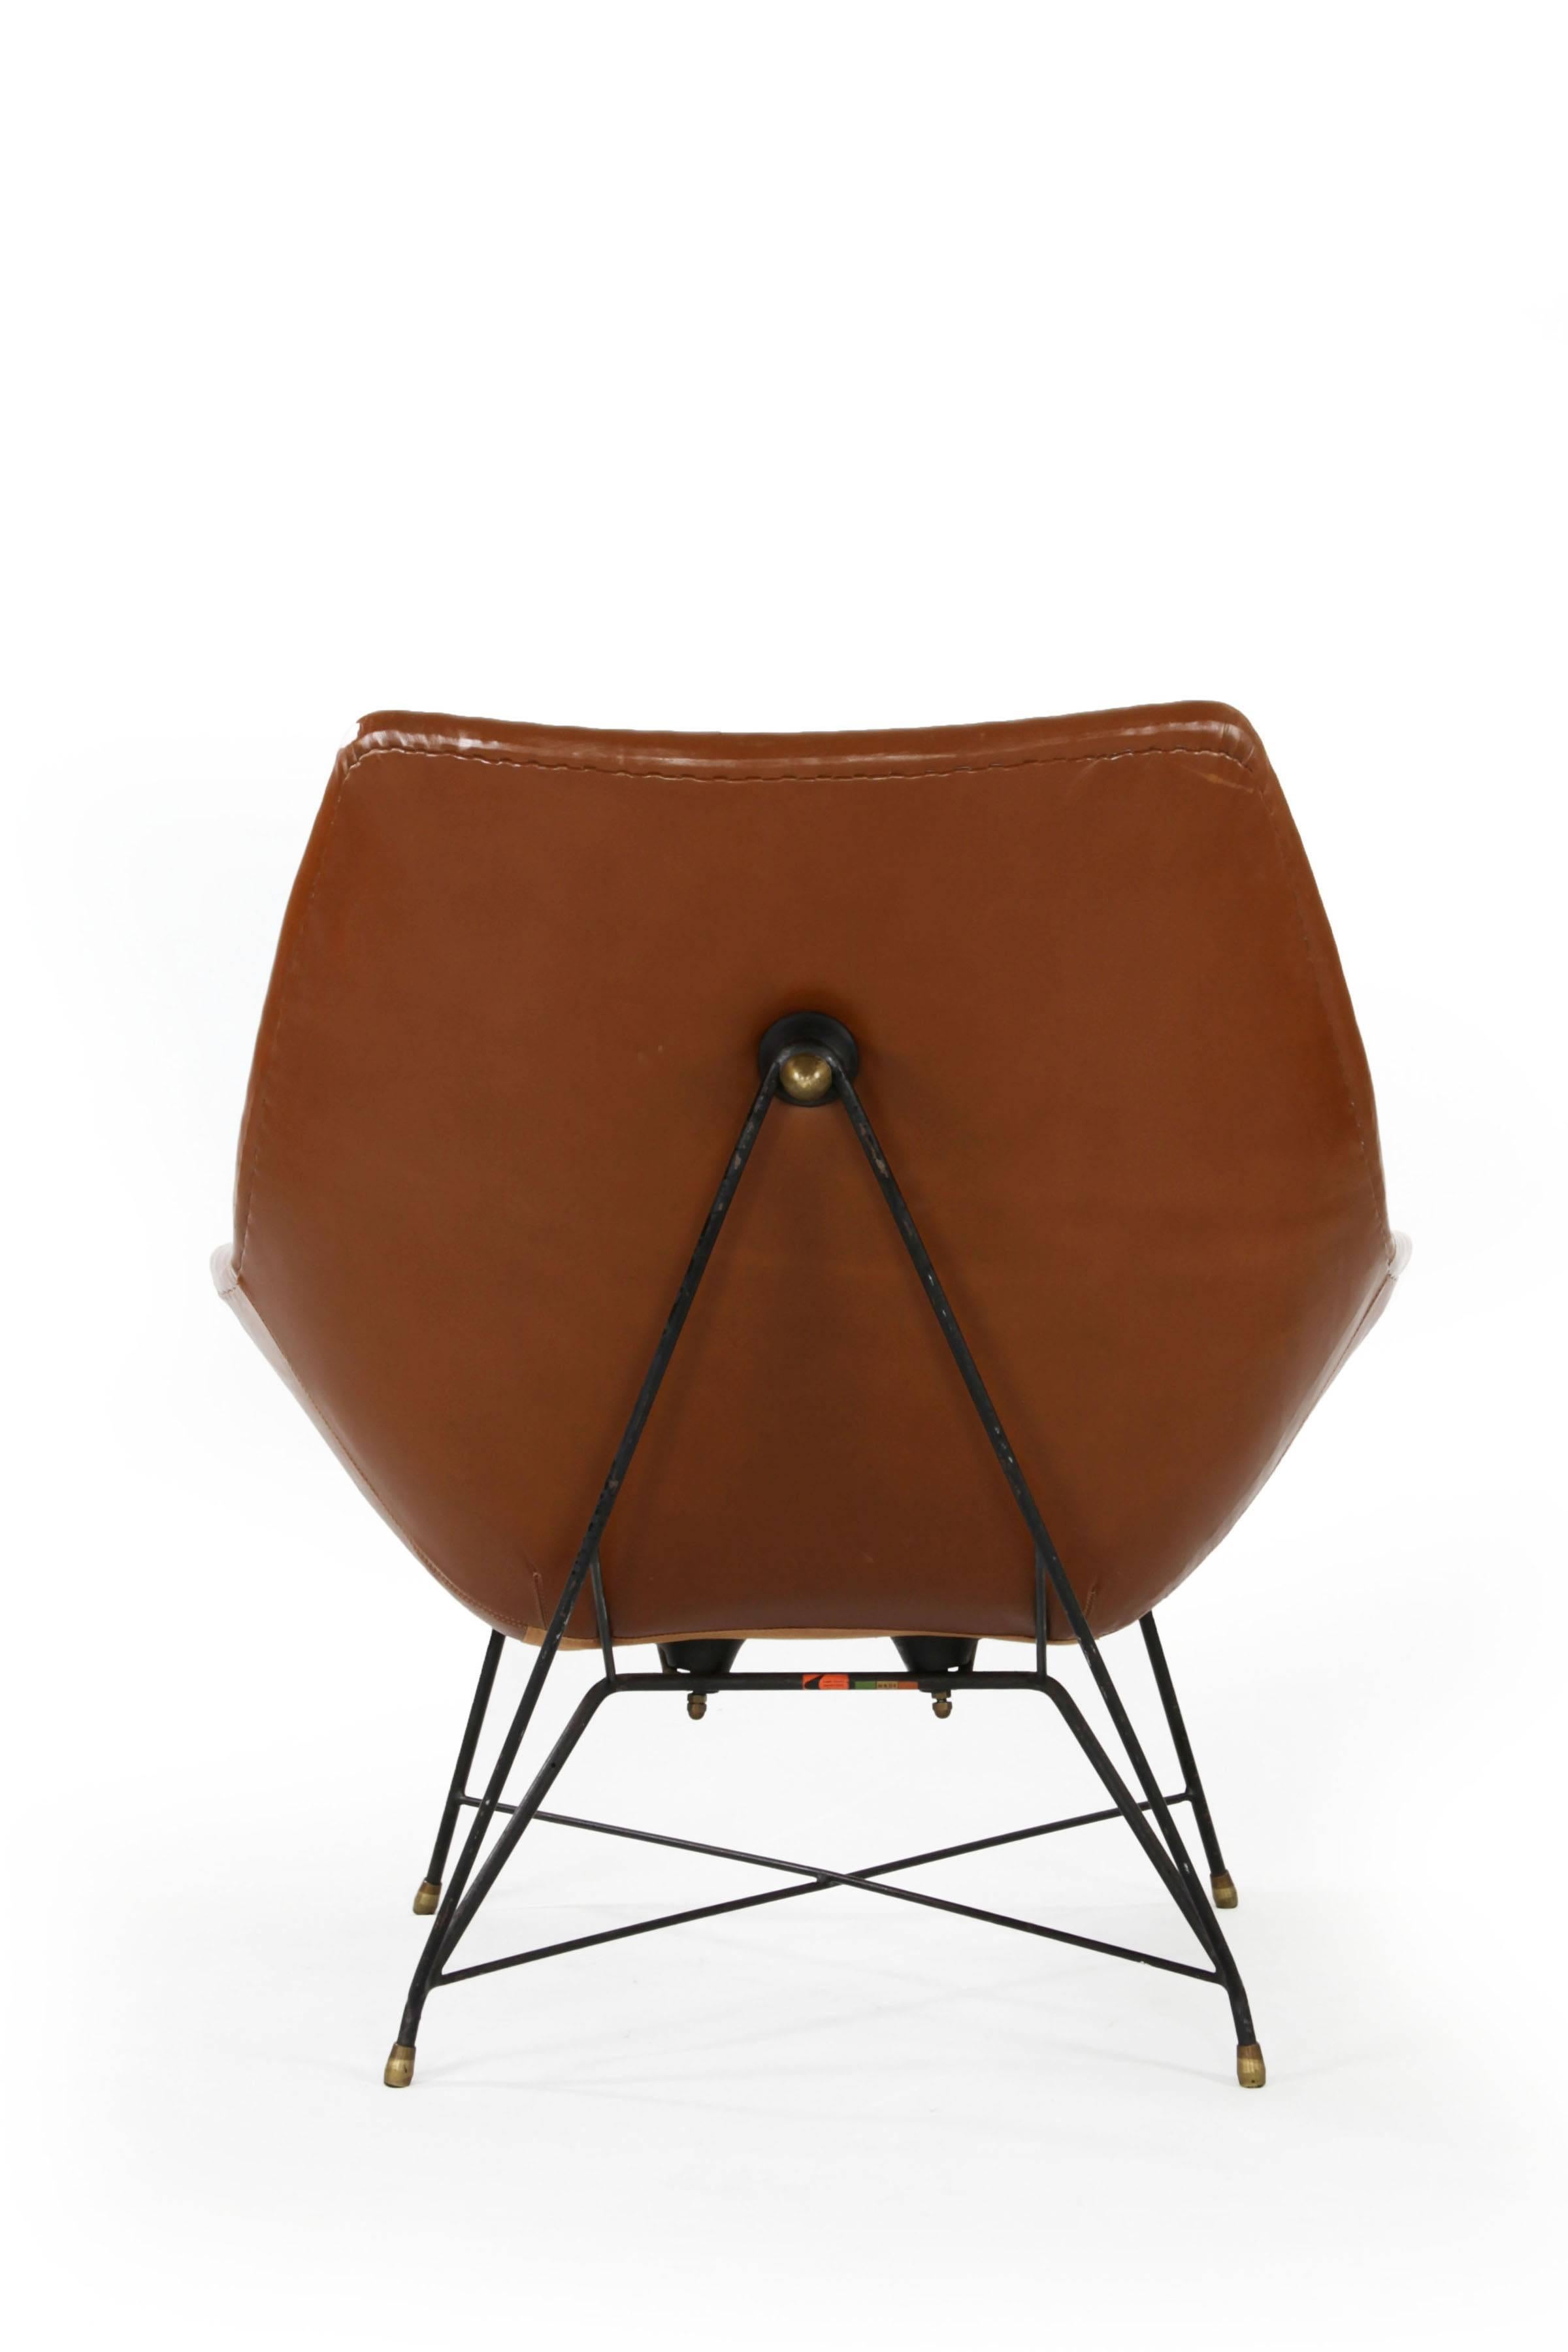 Mid-20th Century Italian Brown Leather Kosmos Chair Design by Augusto Bozzi for Saporiti, 1954 For Sale